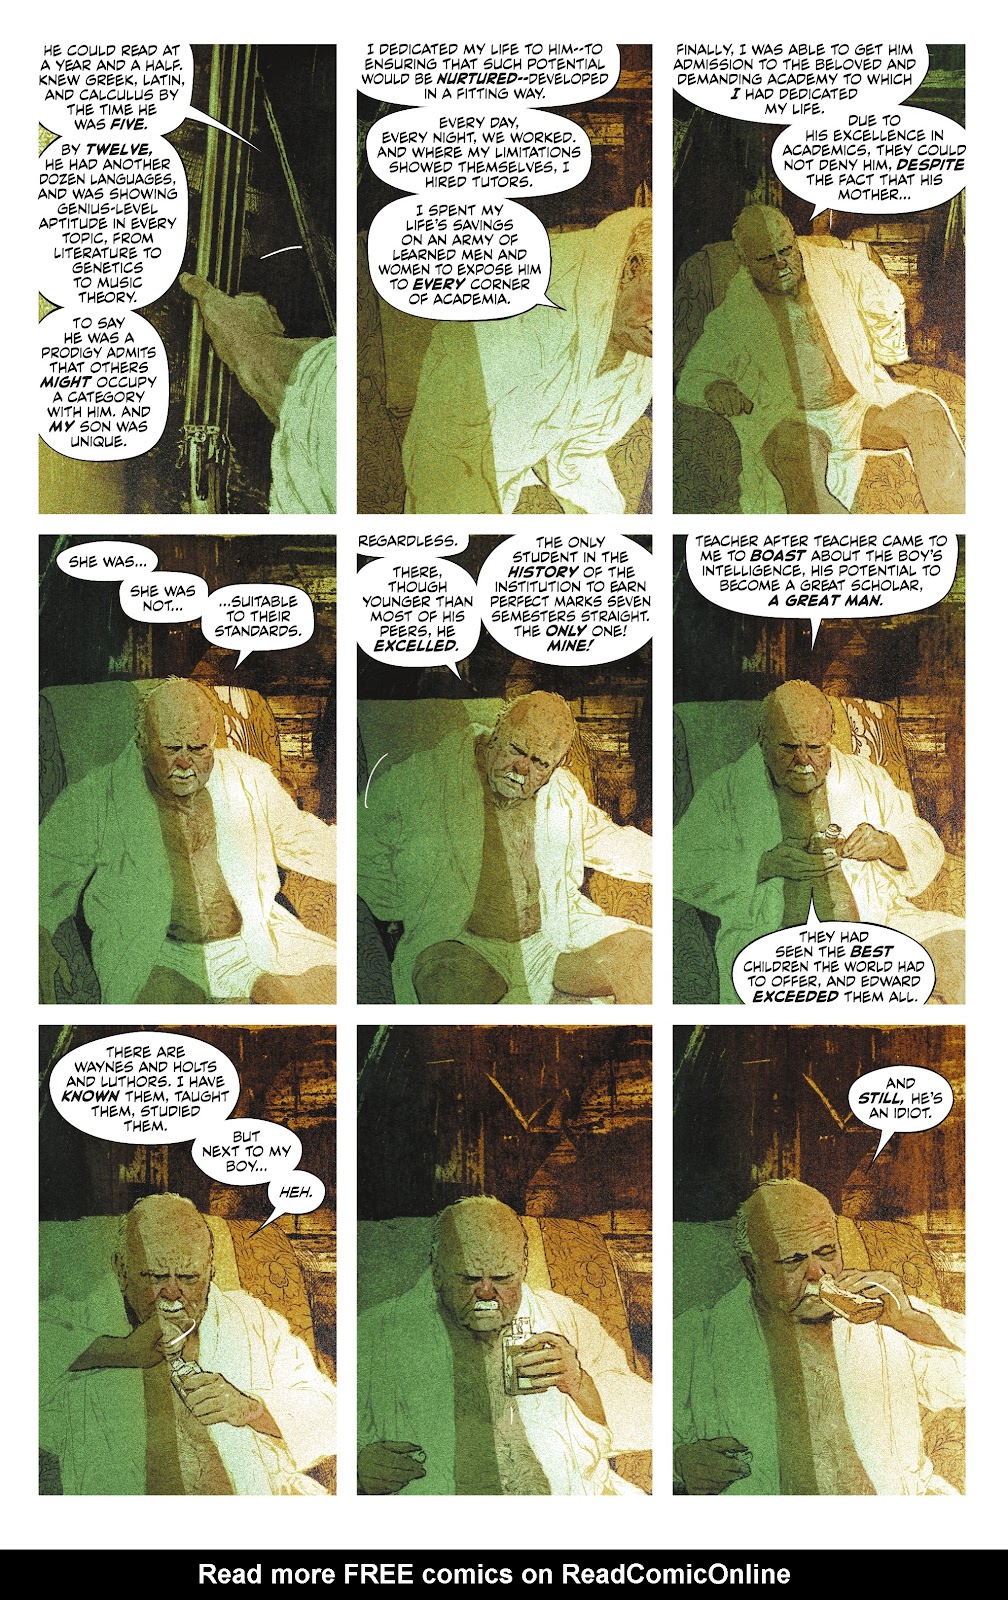 Batman: One Bad Day - The Riddler issue 1 - Page 34